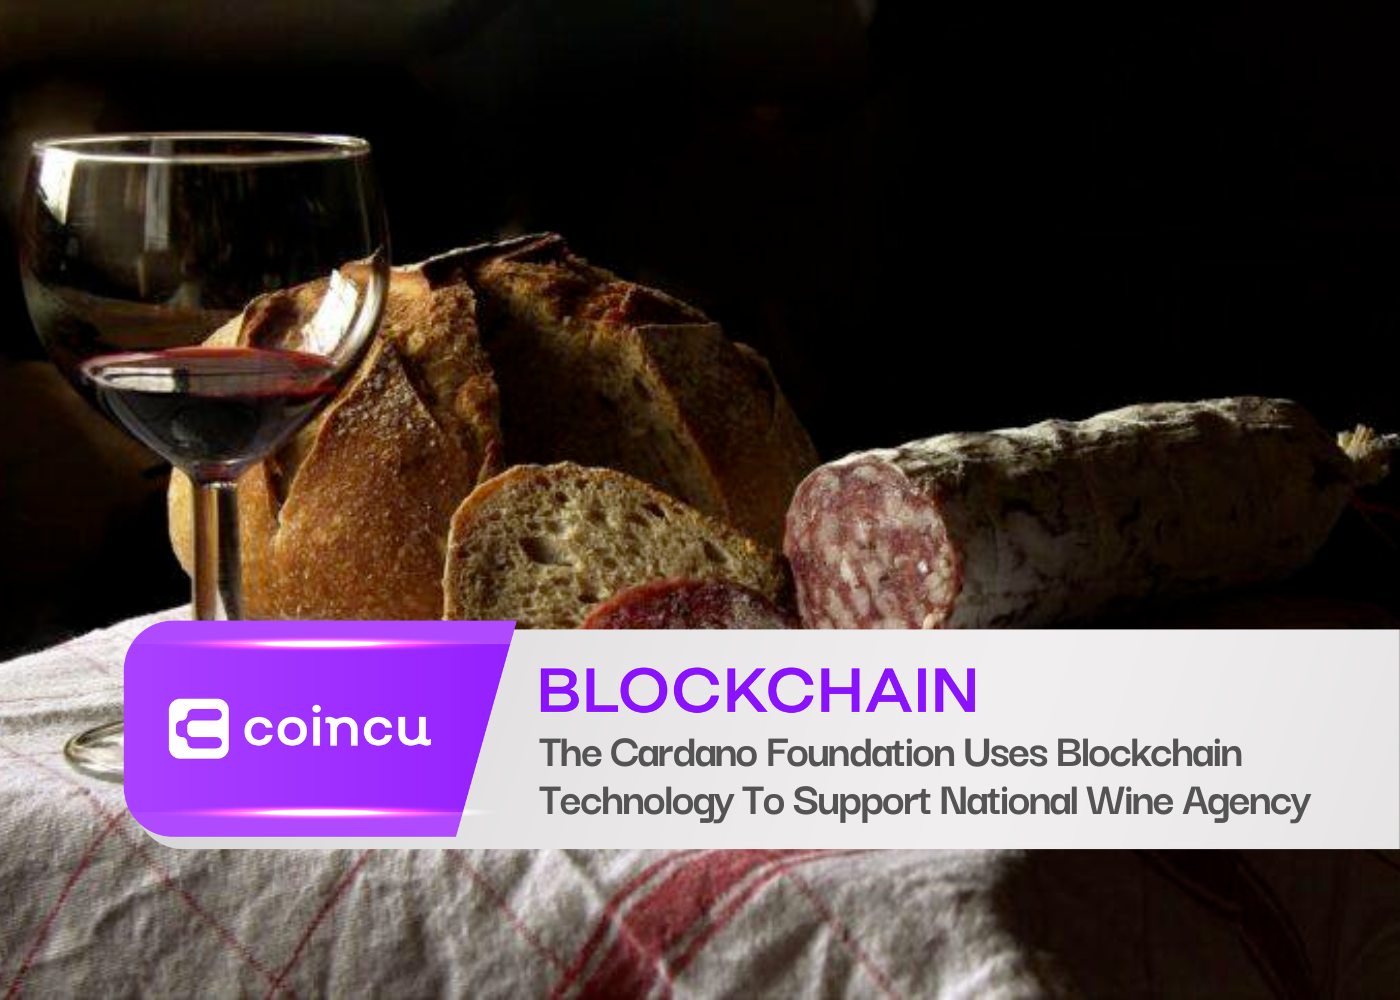 The Cardano Foundation Uses Blockchain Technology To Support National Wine Agency